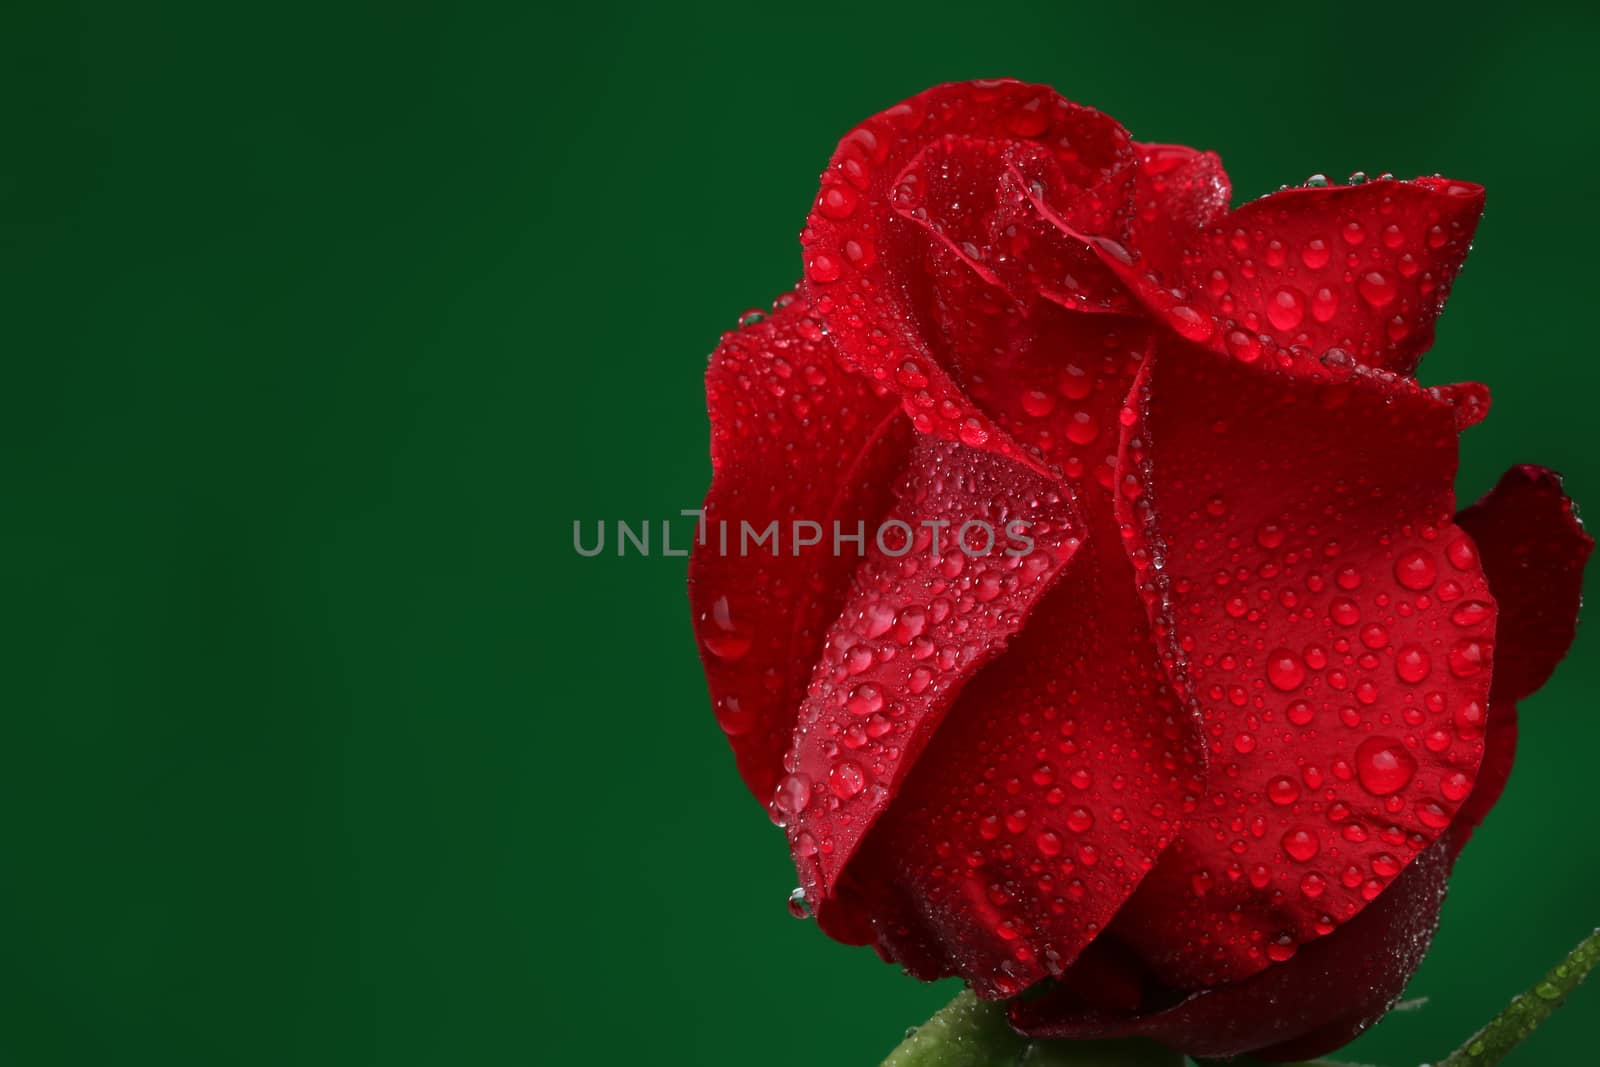 Red rose with lots of water drops. Macro